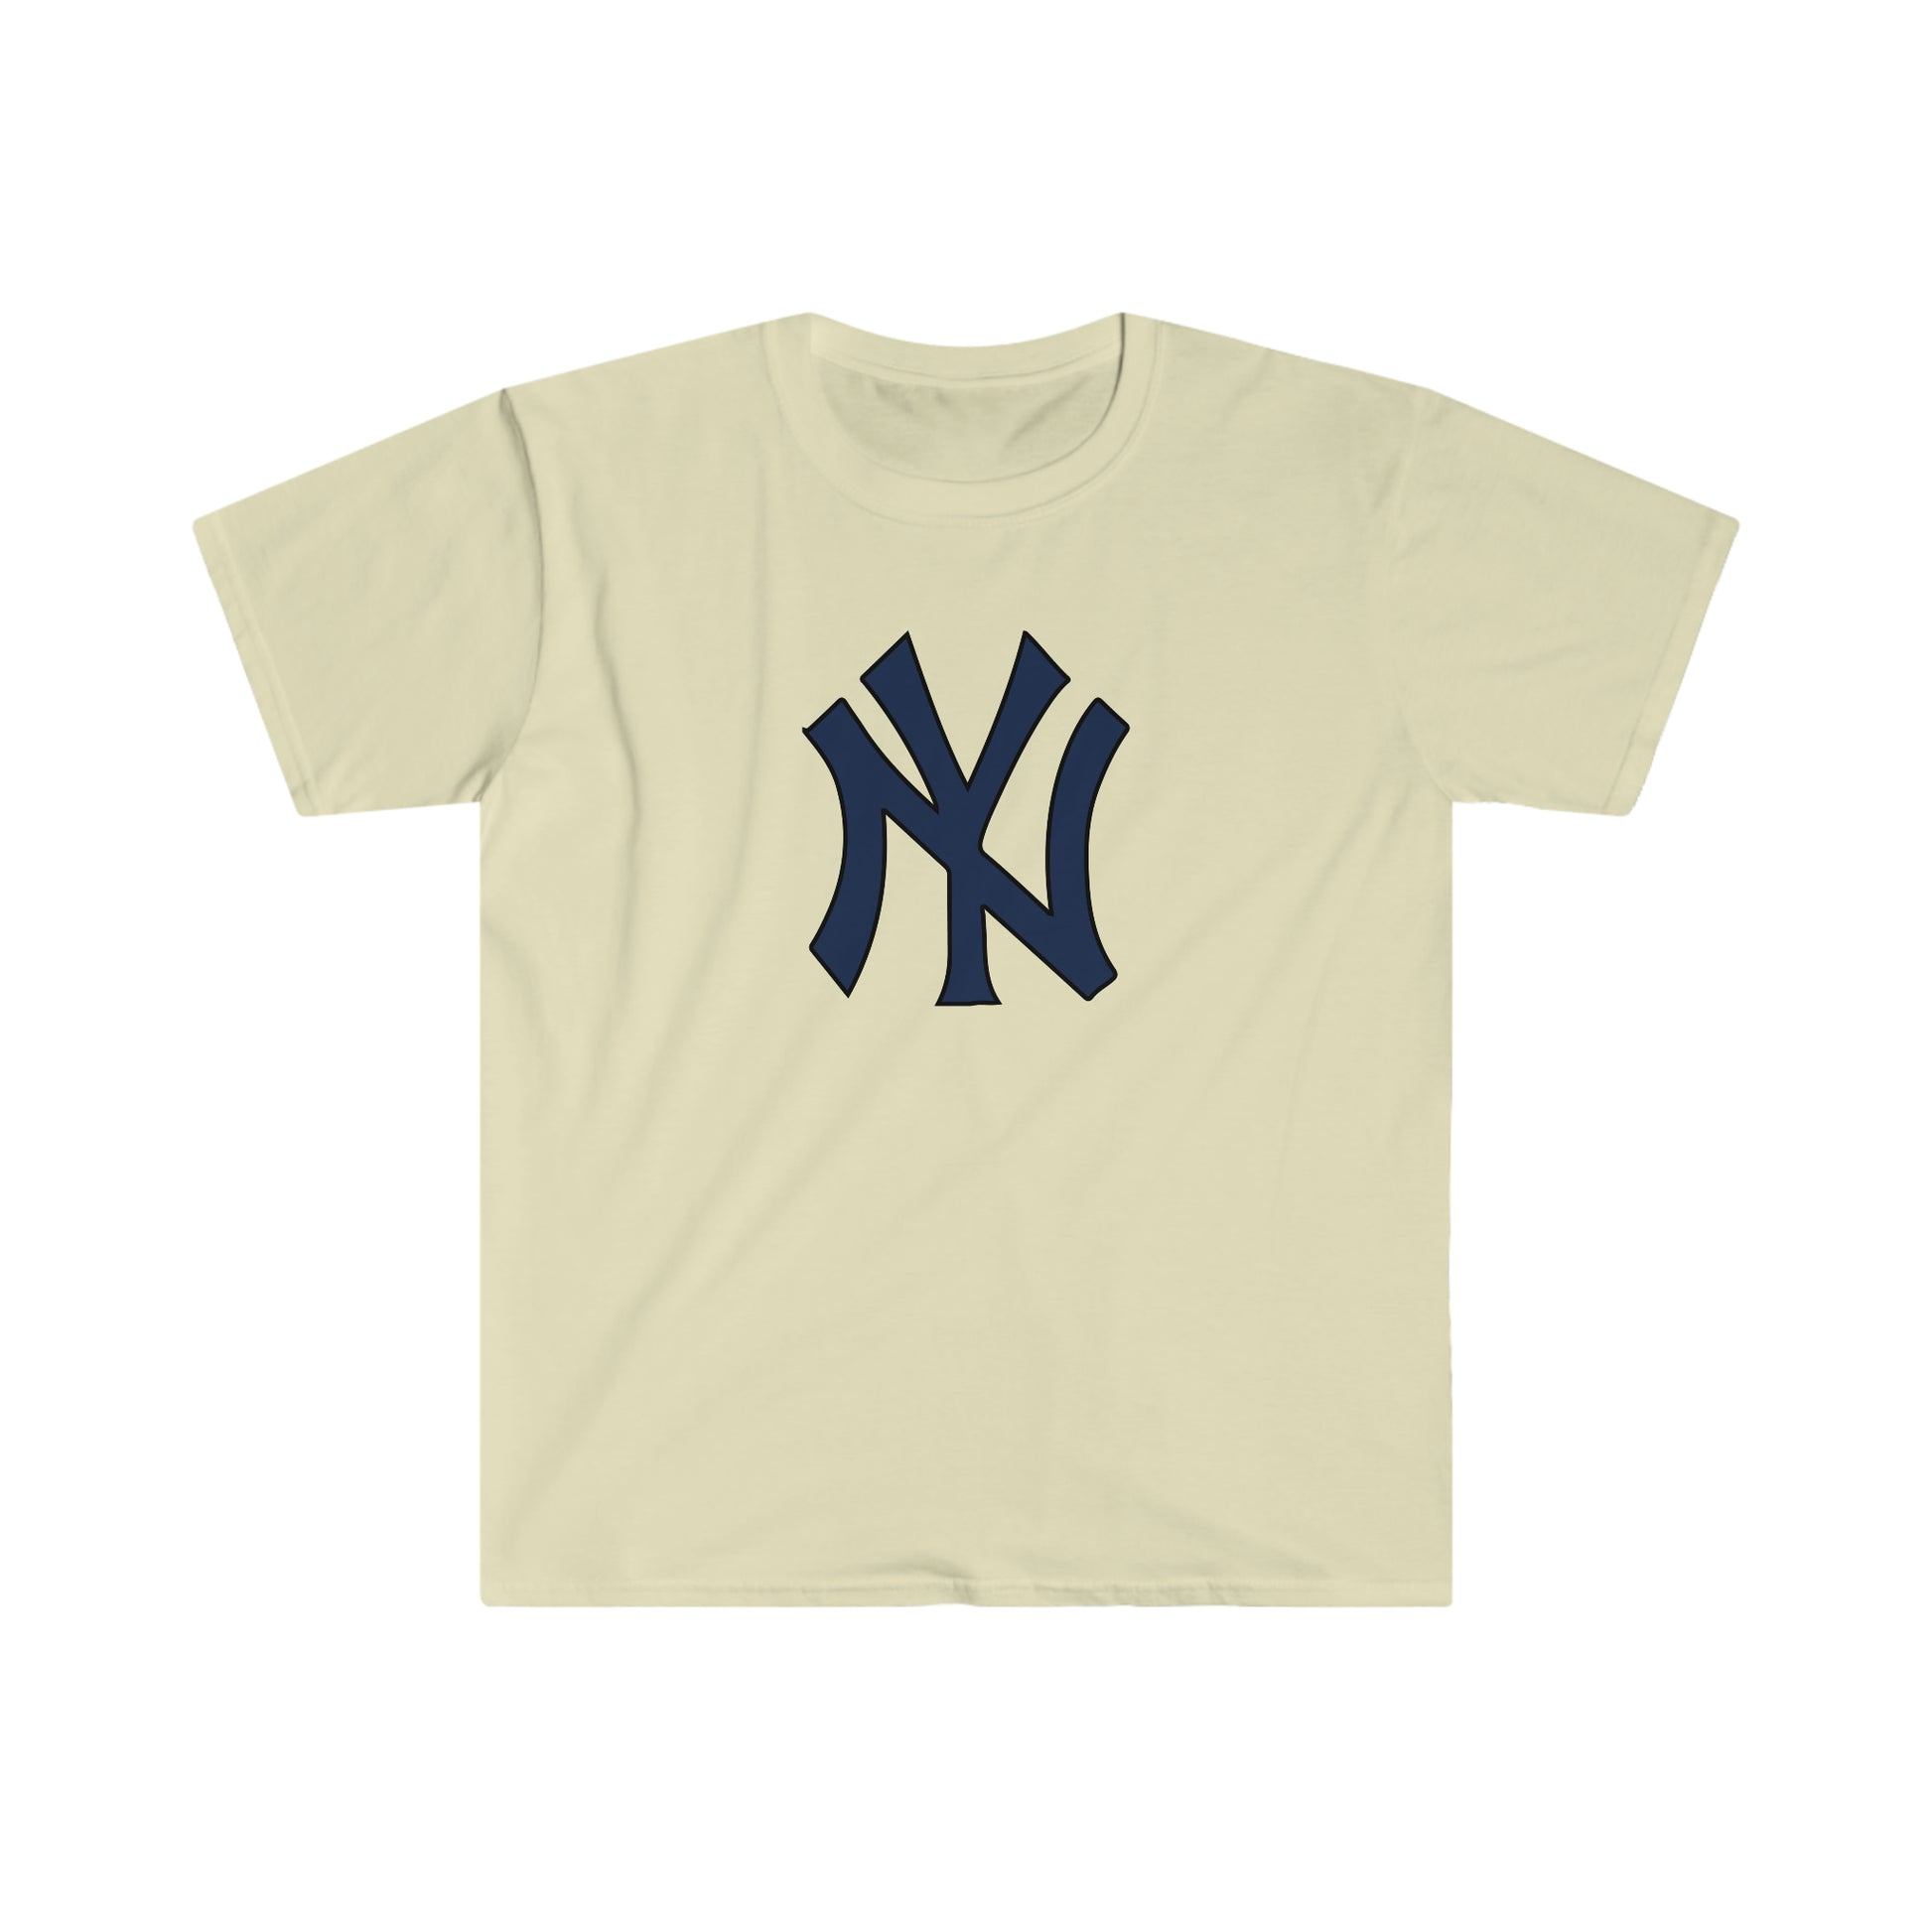 Official Anthony Rizzo Jersey, Anthony Rizzo Yankees Shirts